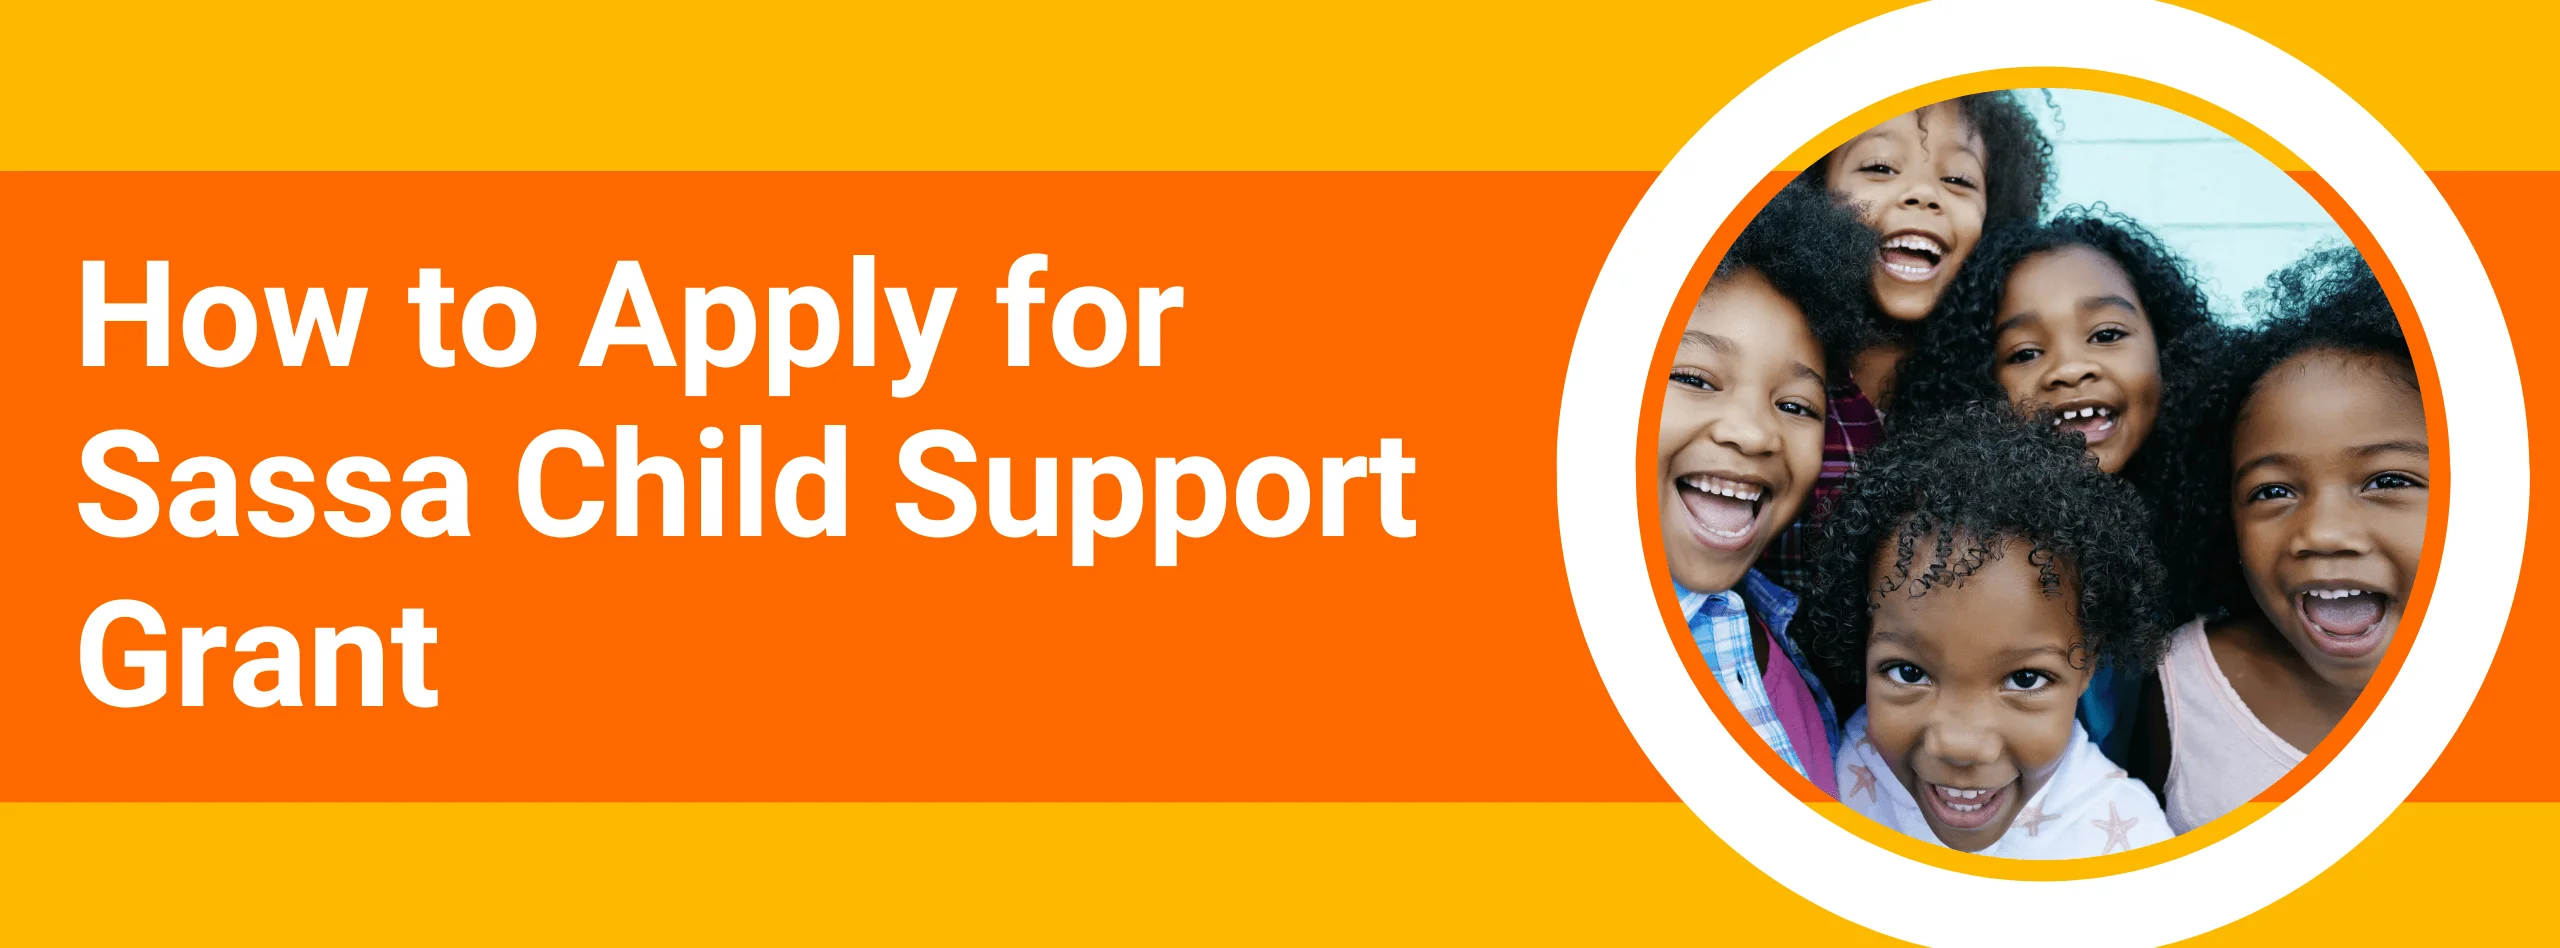 How to Apply for Sassa Child Support Grant